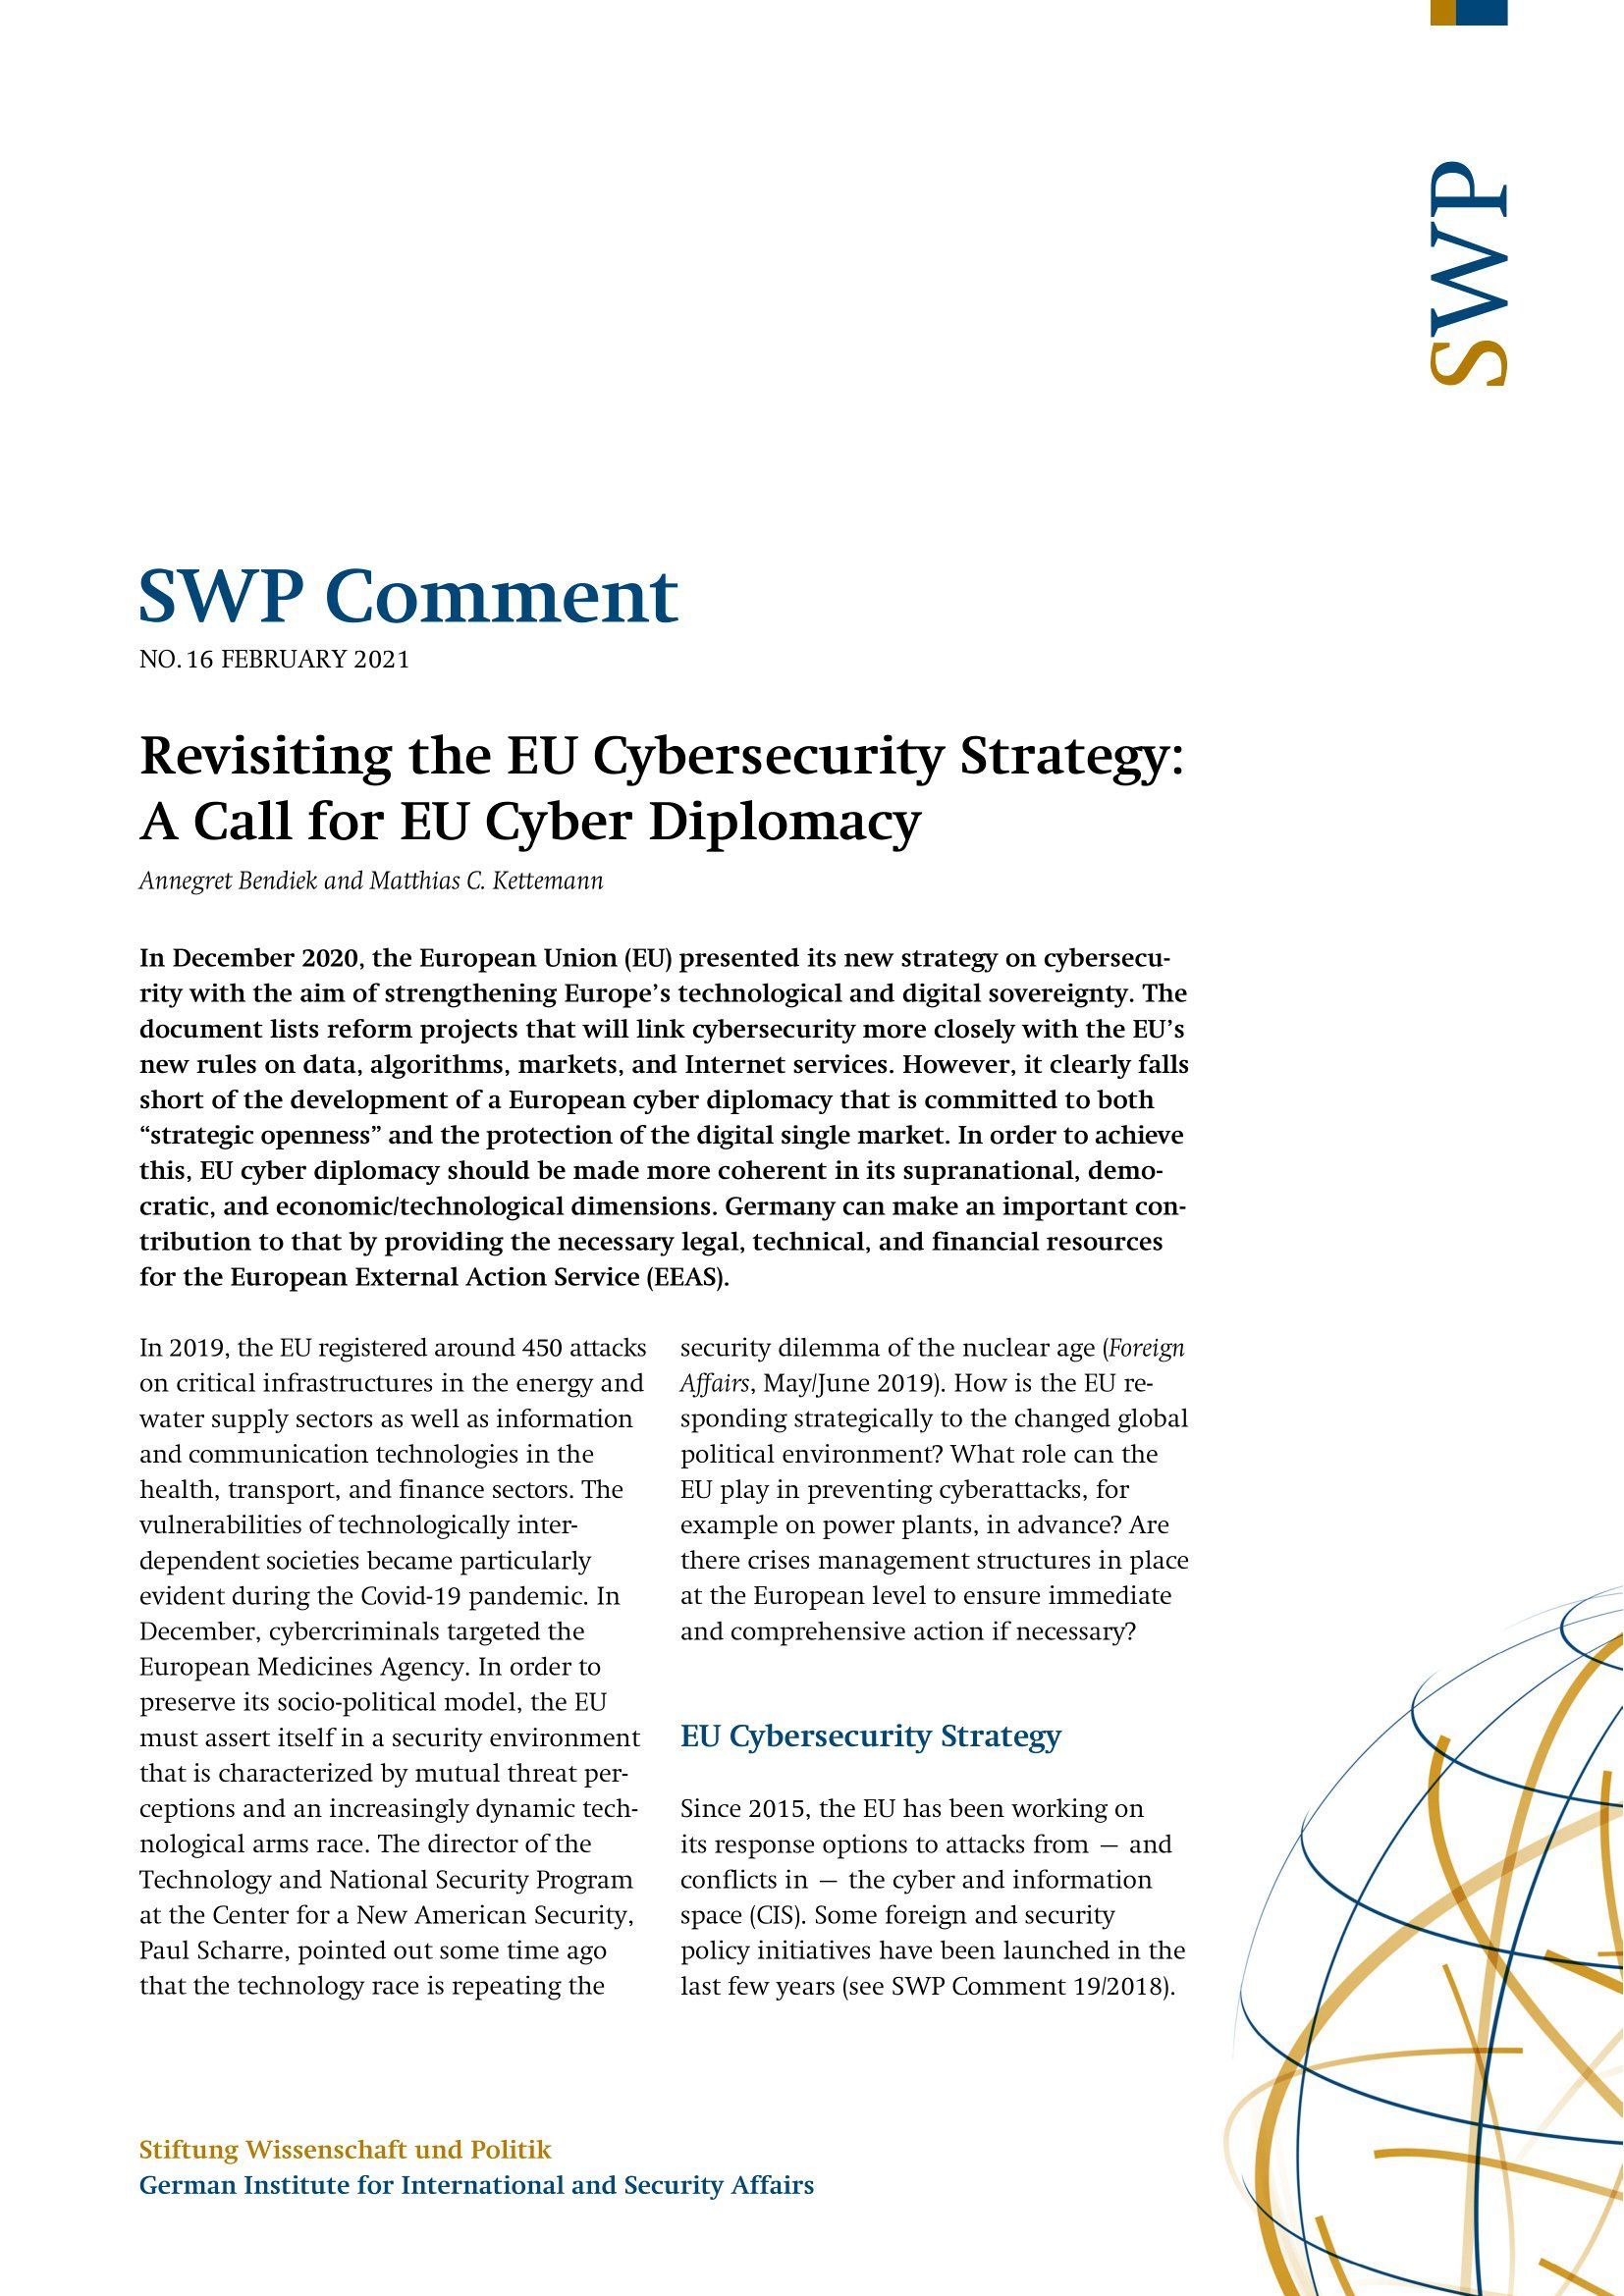 Revisiting the EU Cybersecurity Strategy: A Call for EU Cyber Diplomacy